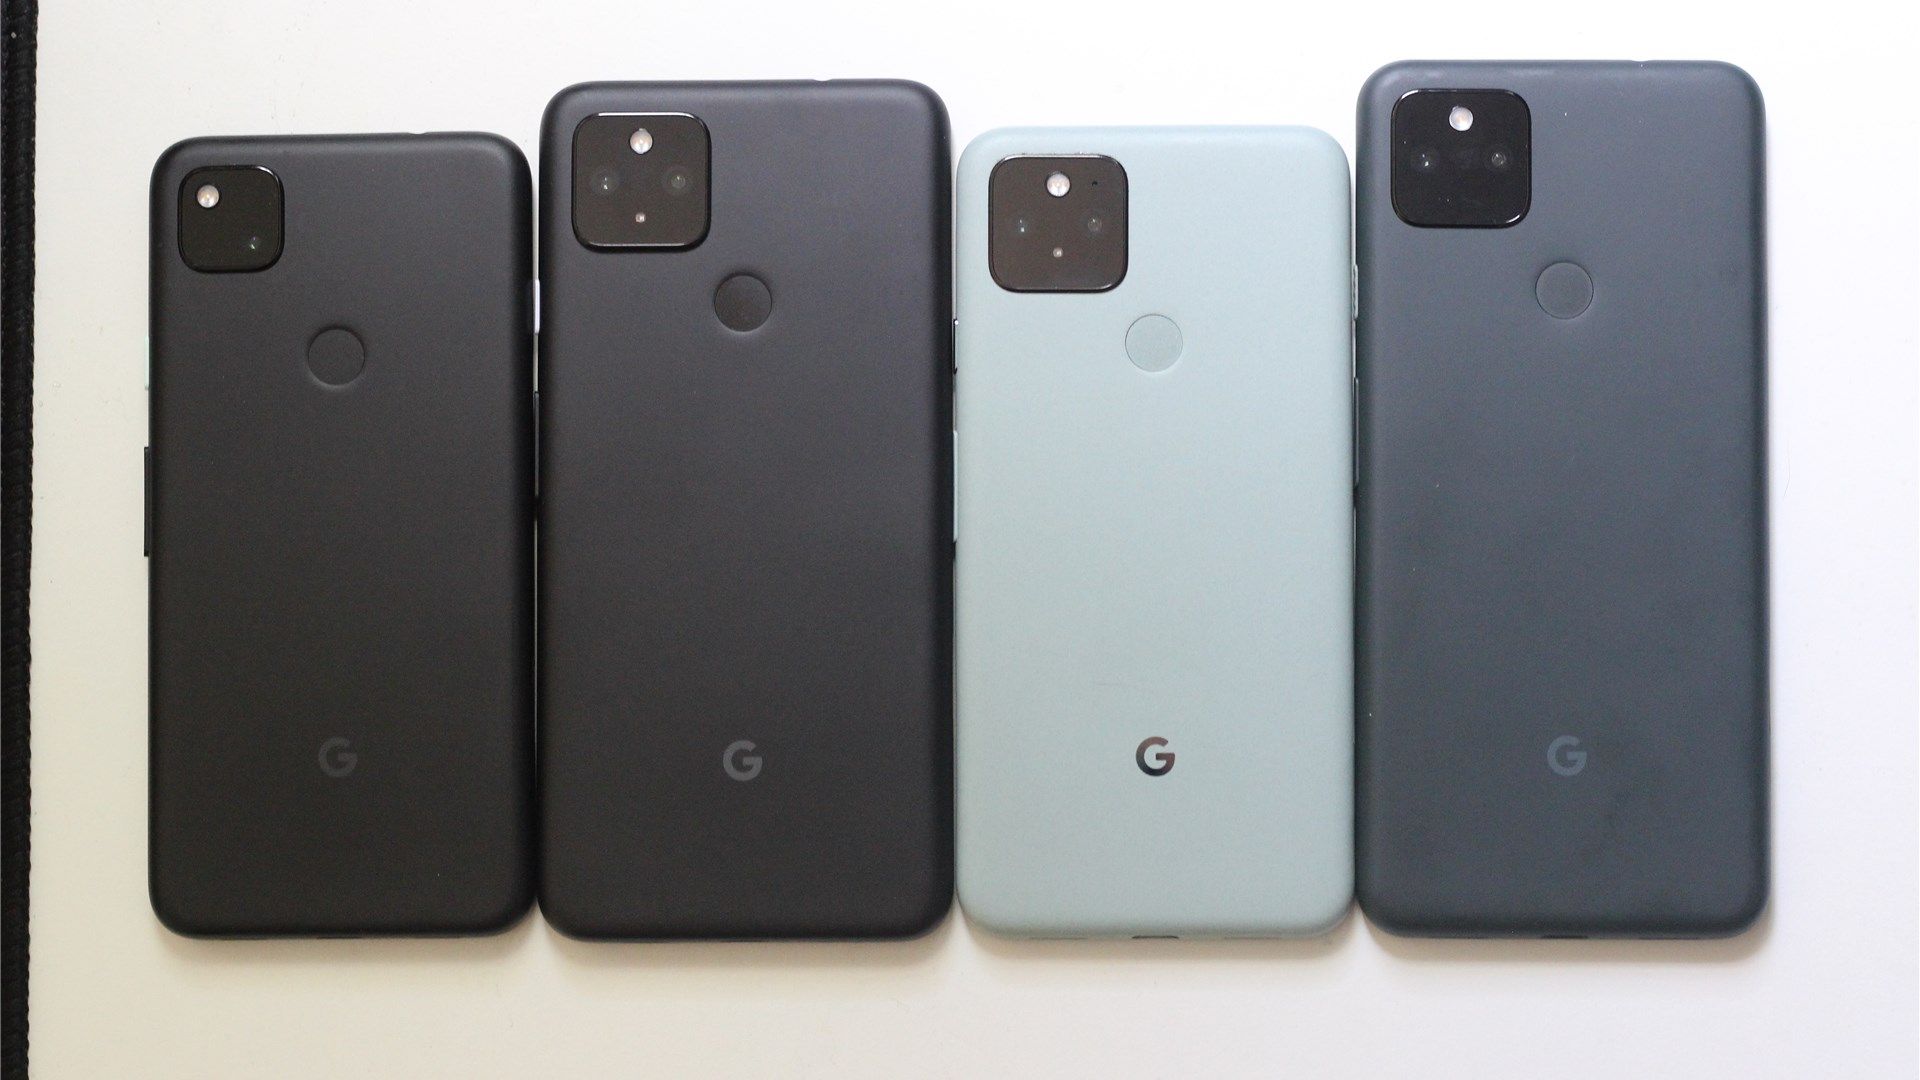 The Pixel 4a, 4a 5G, 5, and 5a side by side